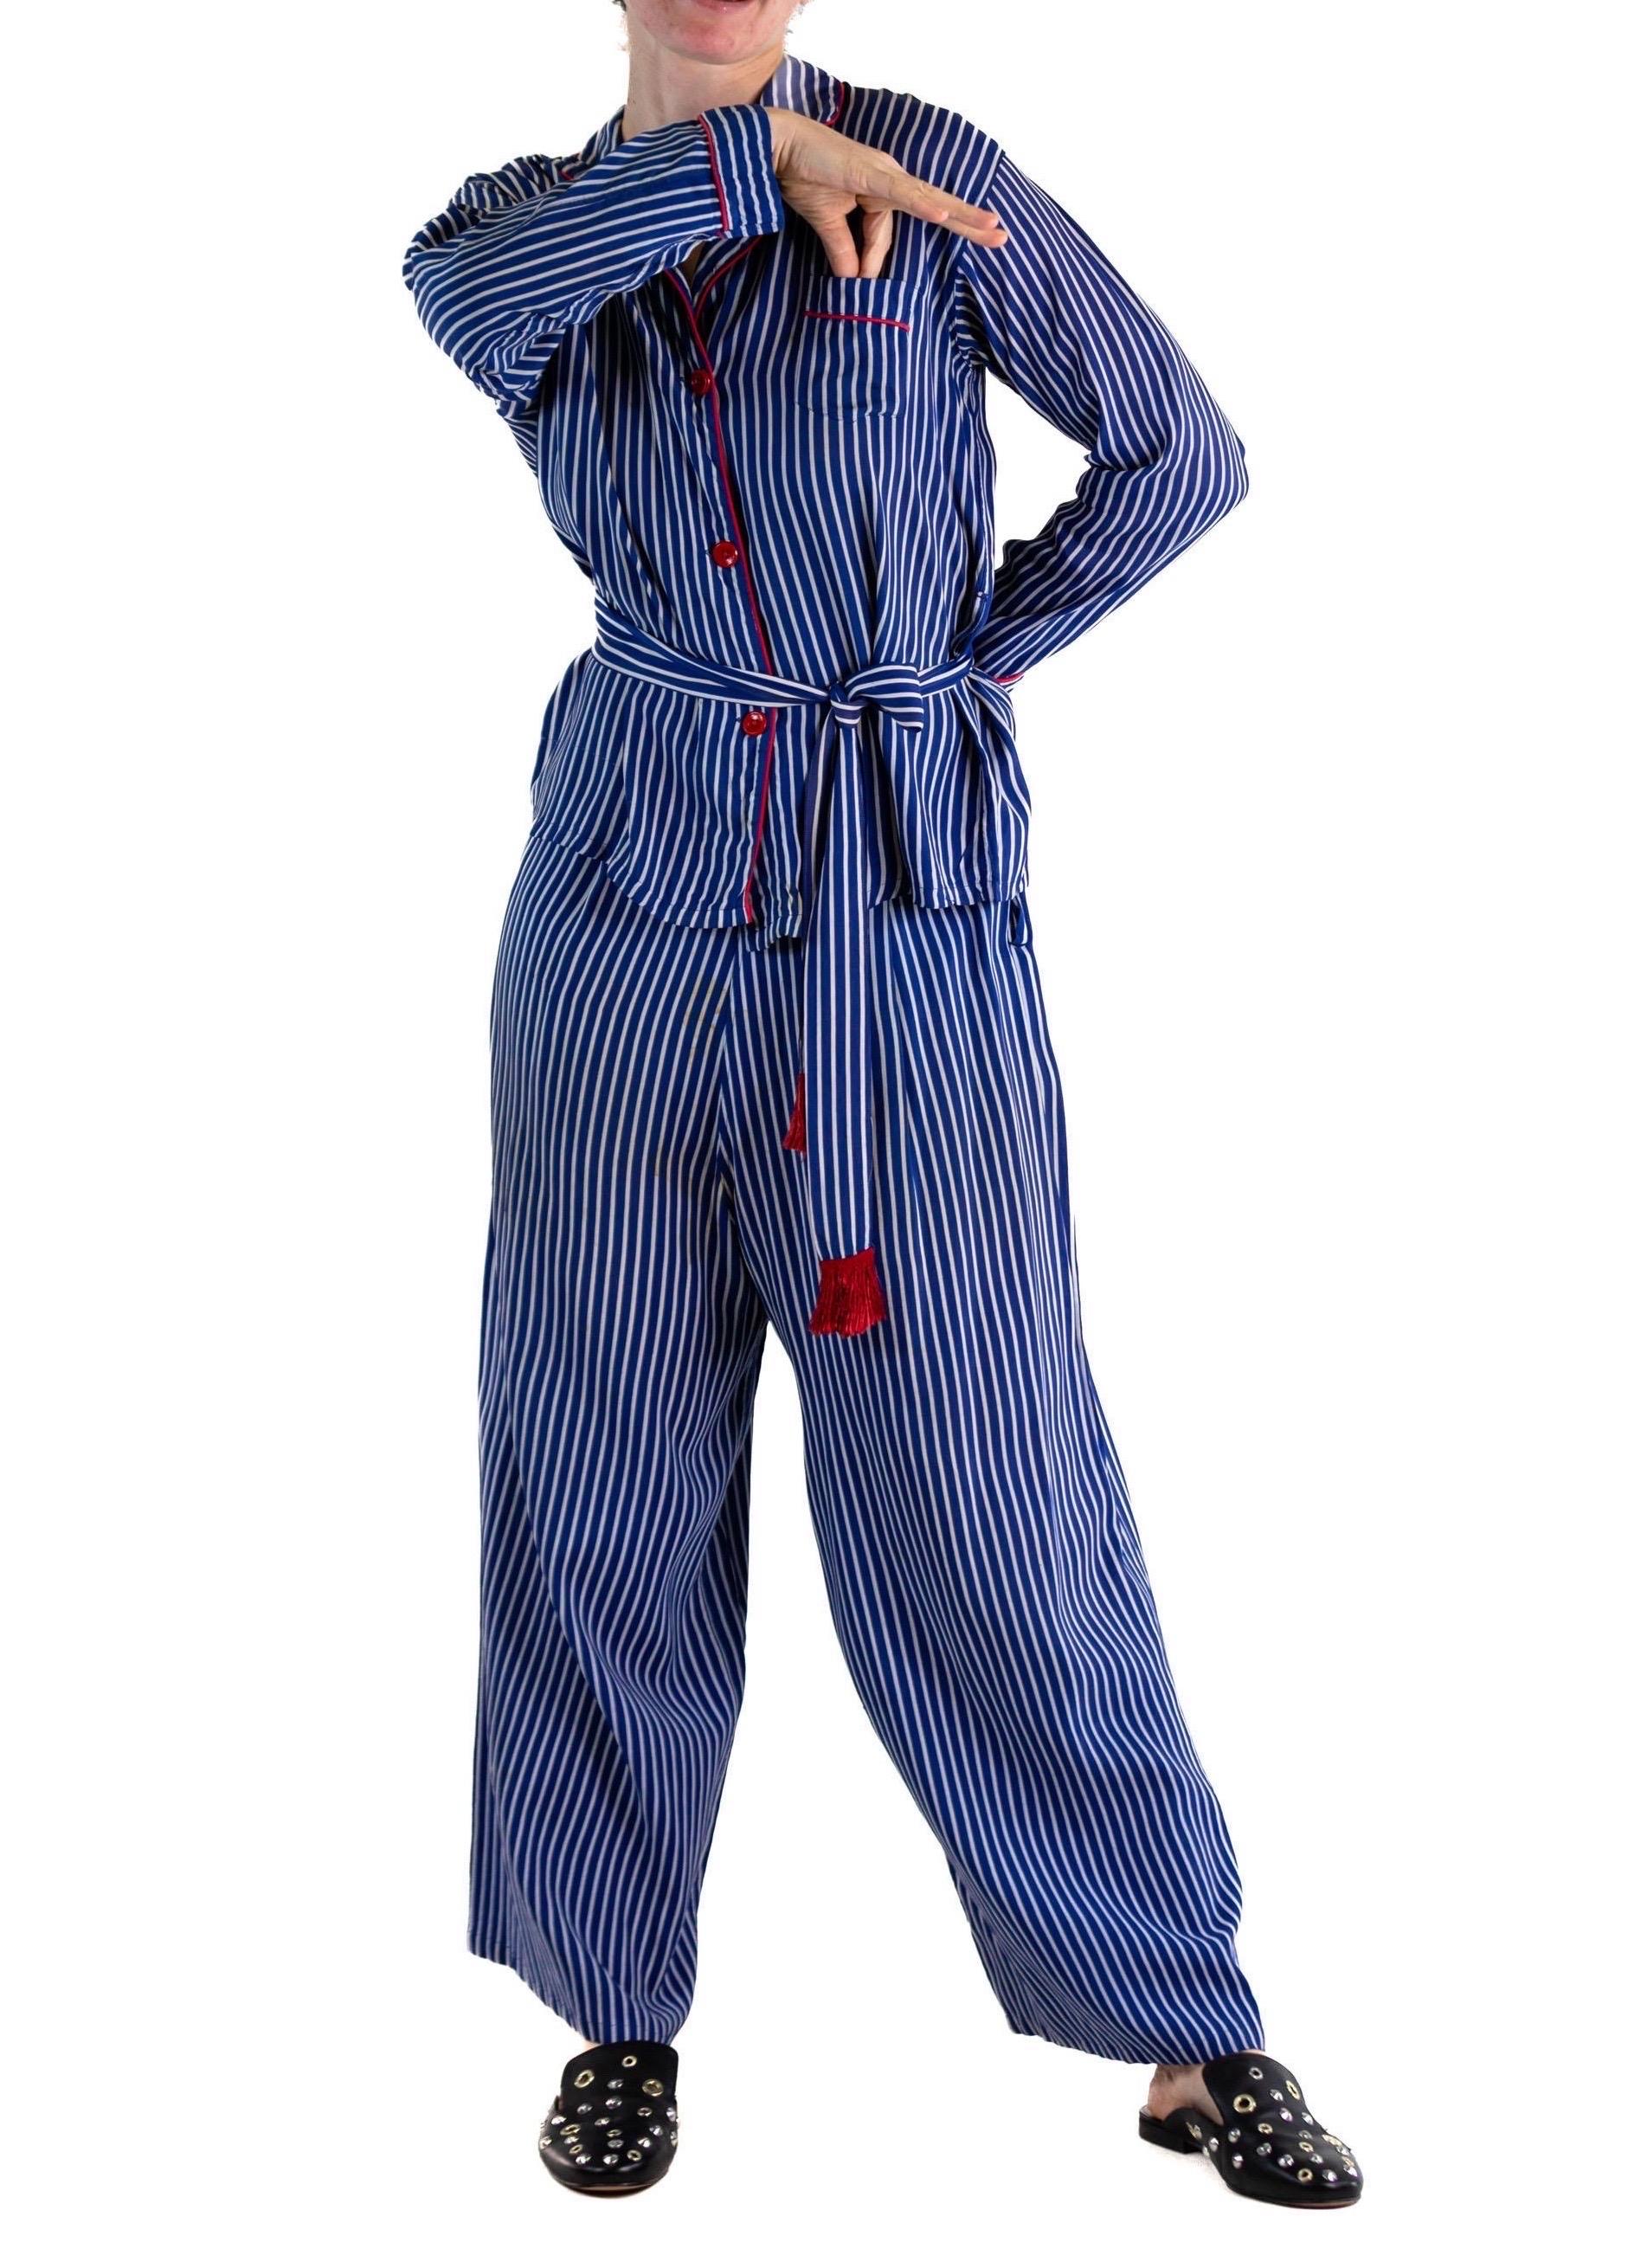 1940S Blue & White Rayon Pajamas With Red Piping For Sale 3